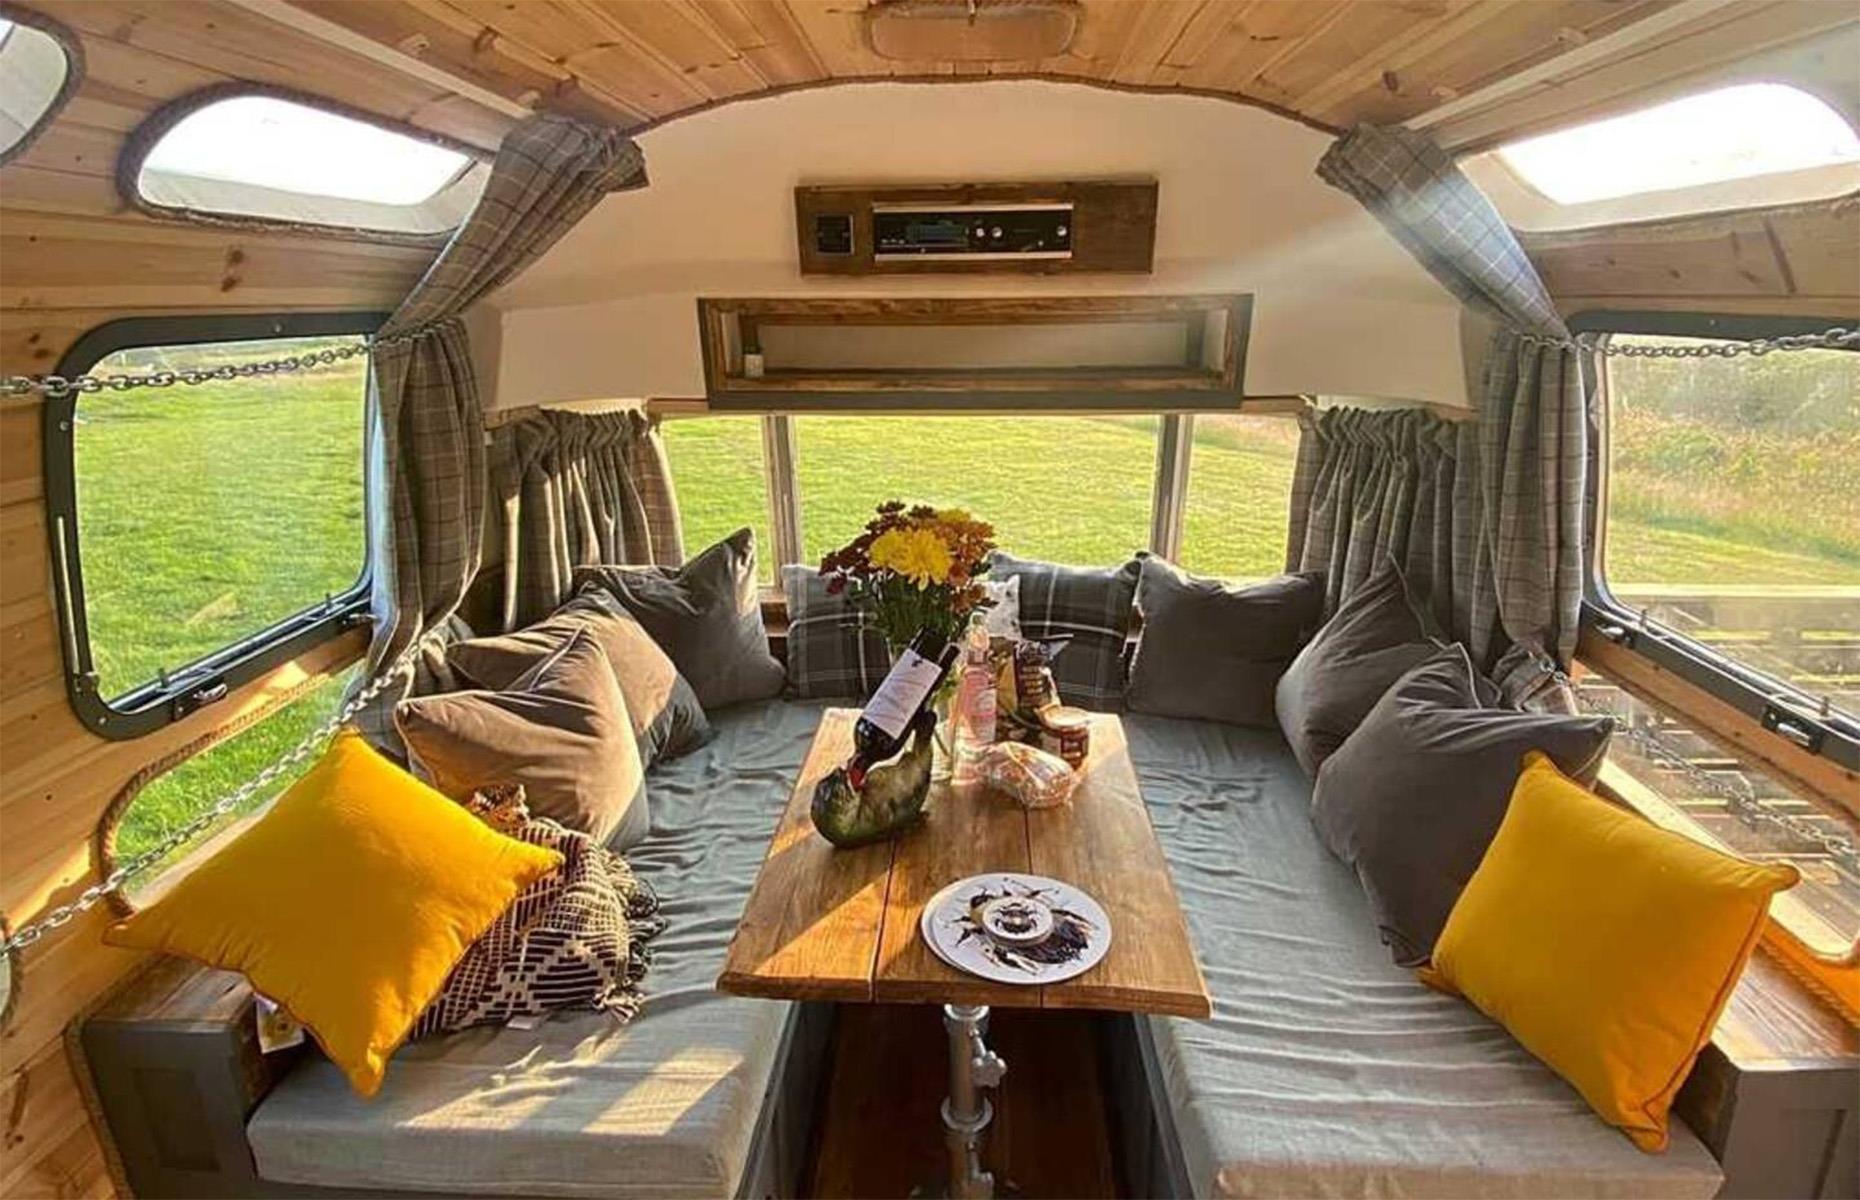 <p>The Airstream includes a fully equipped kitchen, bathroom, bedroom and dining area, which also converts seamlessly into another bed if required.</p>  <p>The interiors are finished to a high standard, with cosy soft furnishings which complement the light wood panelling that runs throughout the space.</p>